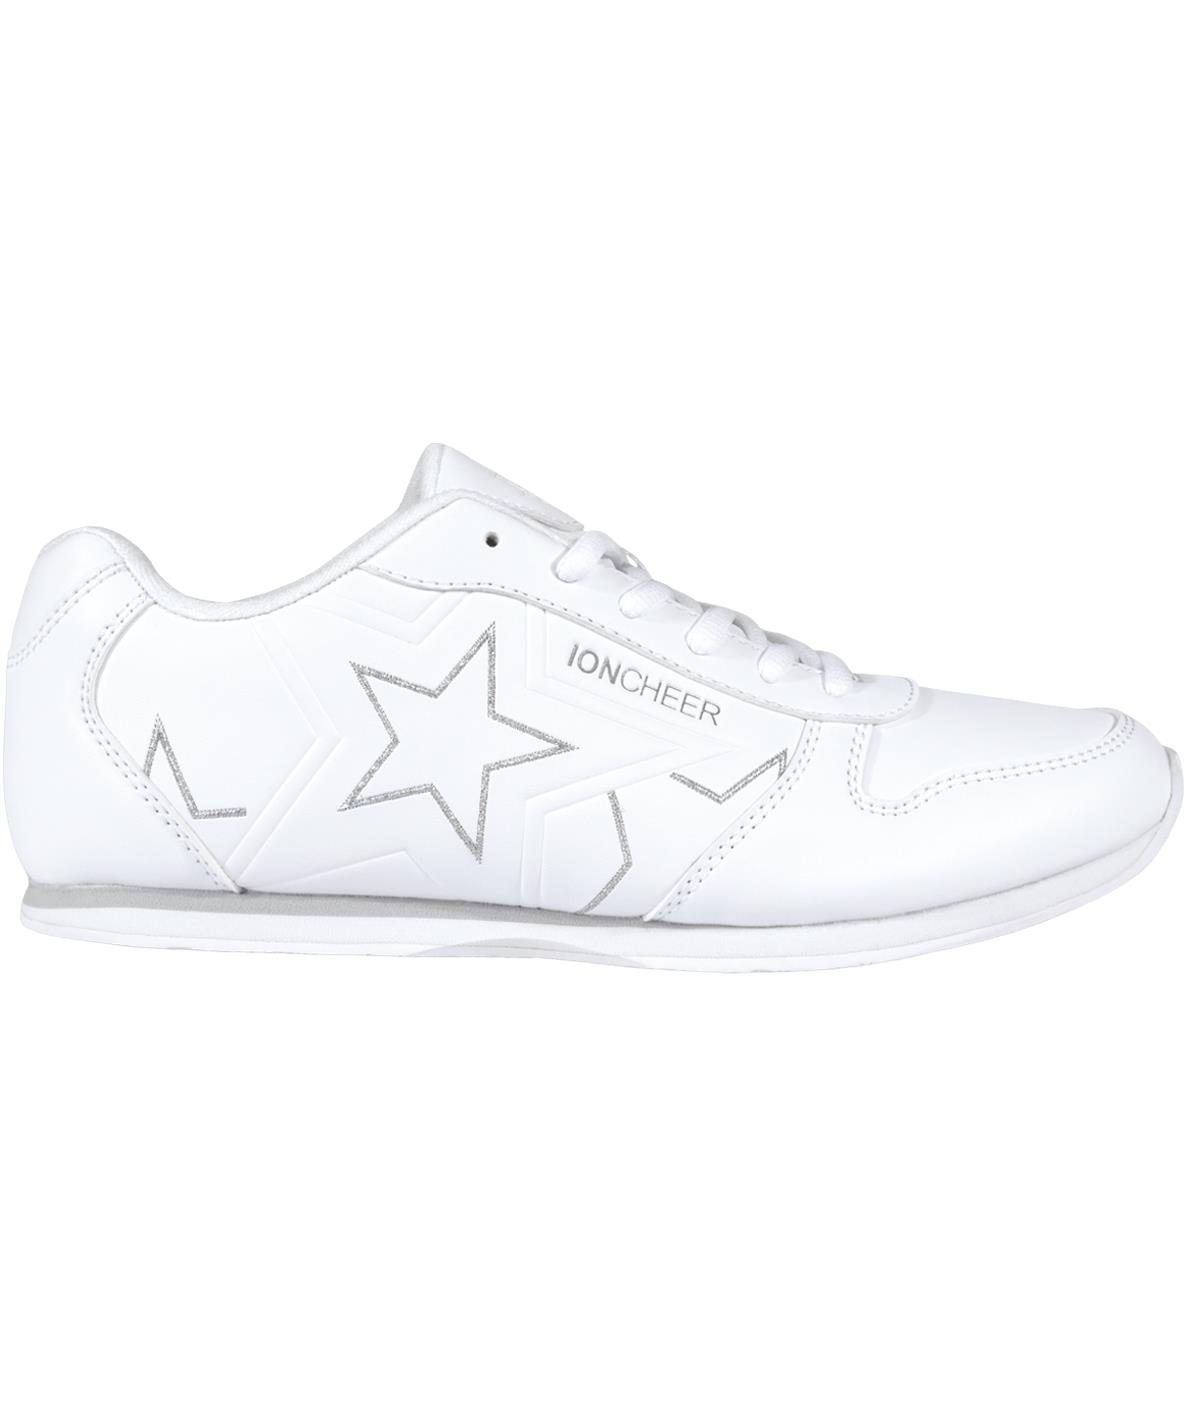 cheerleading shoes payless